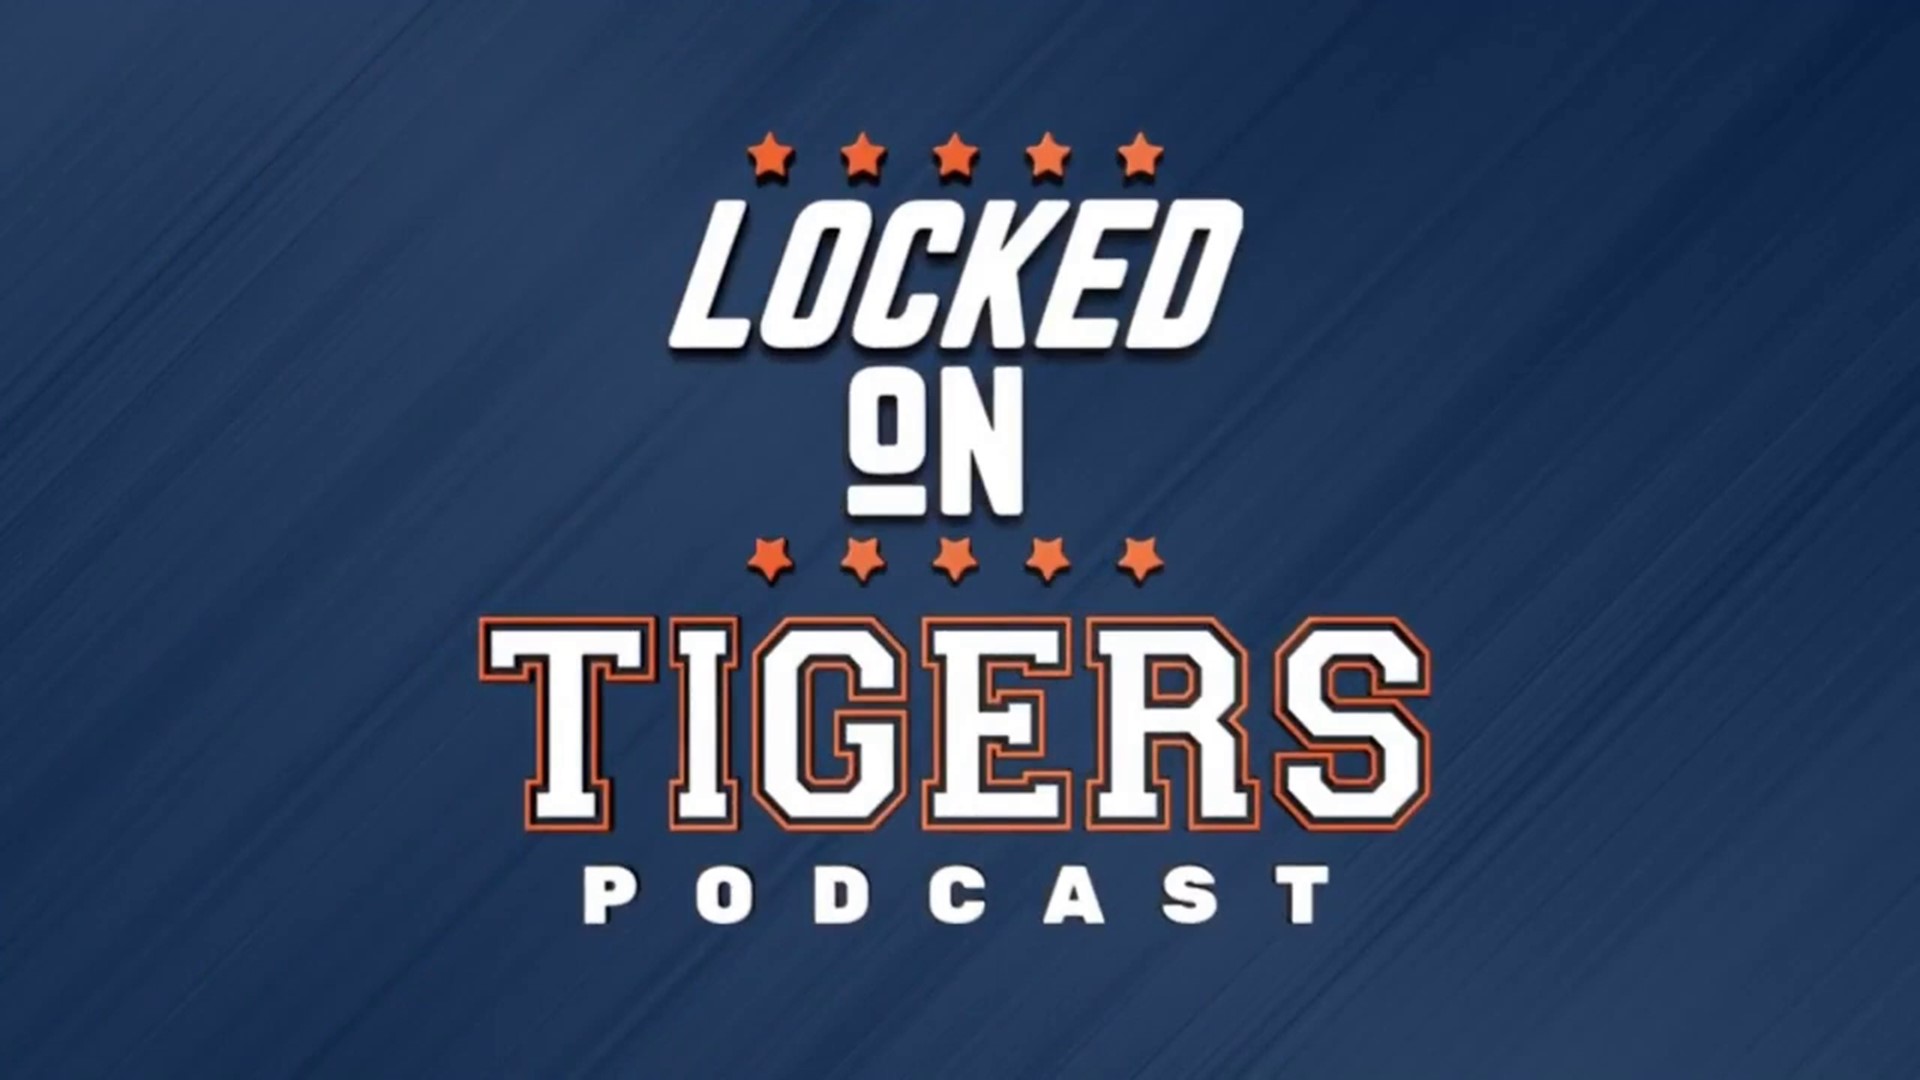 Today we discuss the Detroit Tigers 7-3 victory over the Oakland Athletics.